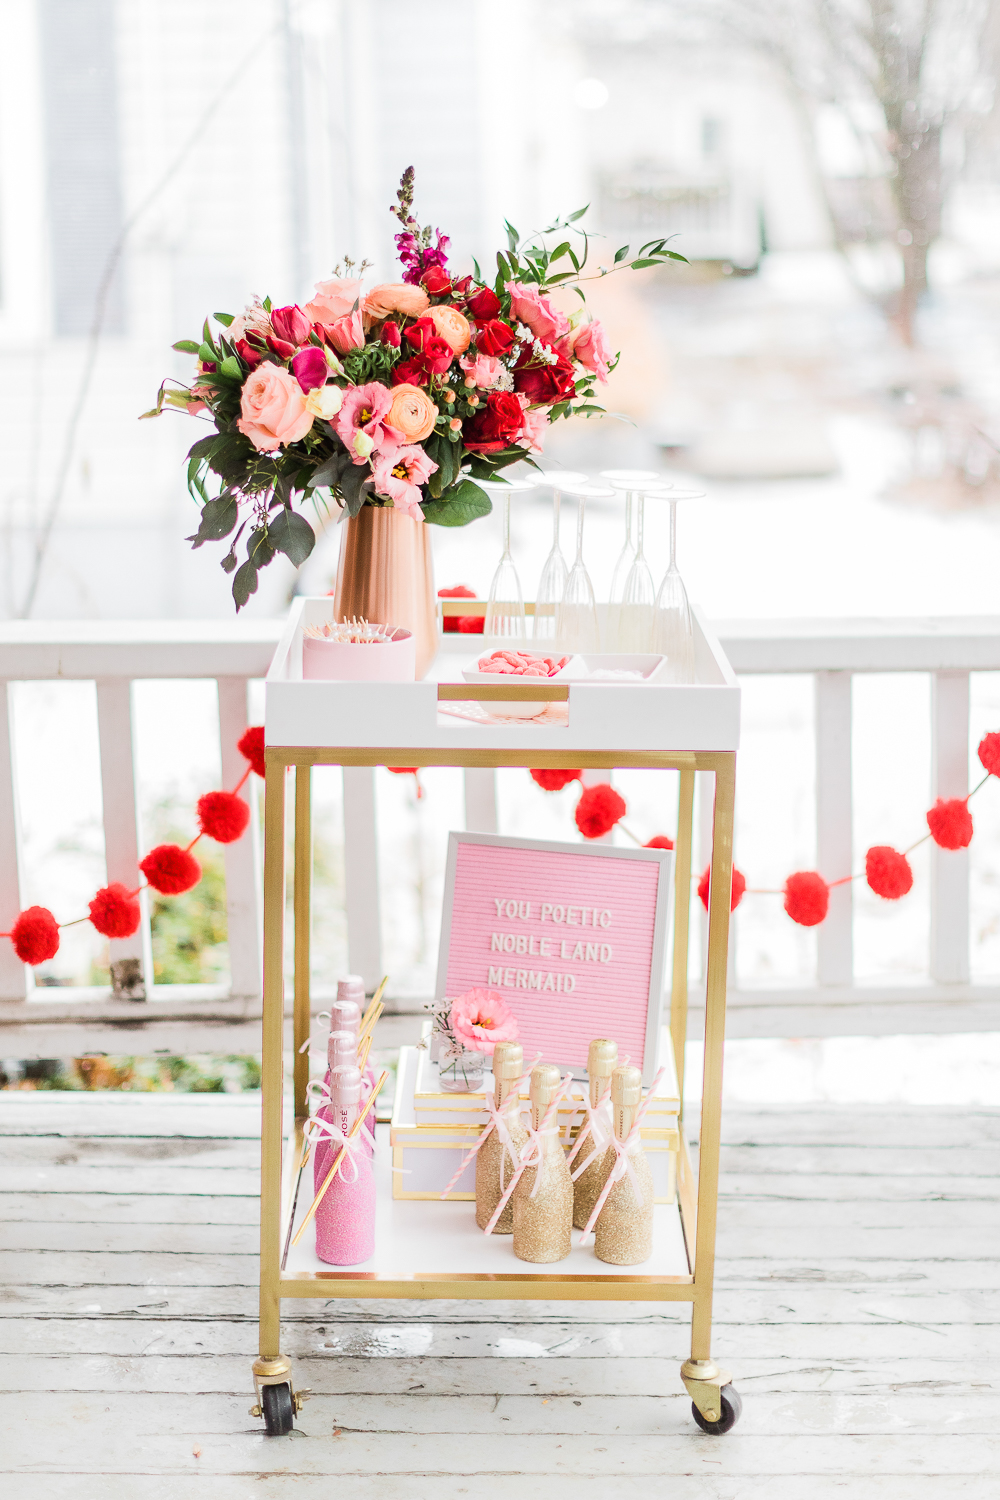 Galentines Day Bar Cart, Galentines letter board ideas, popular entertaining blog Diary of a Debutante, popular entertaining blogger Stephanie Ziajka